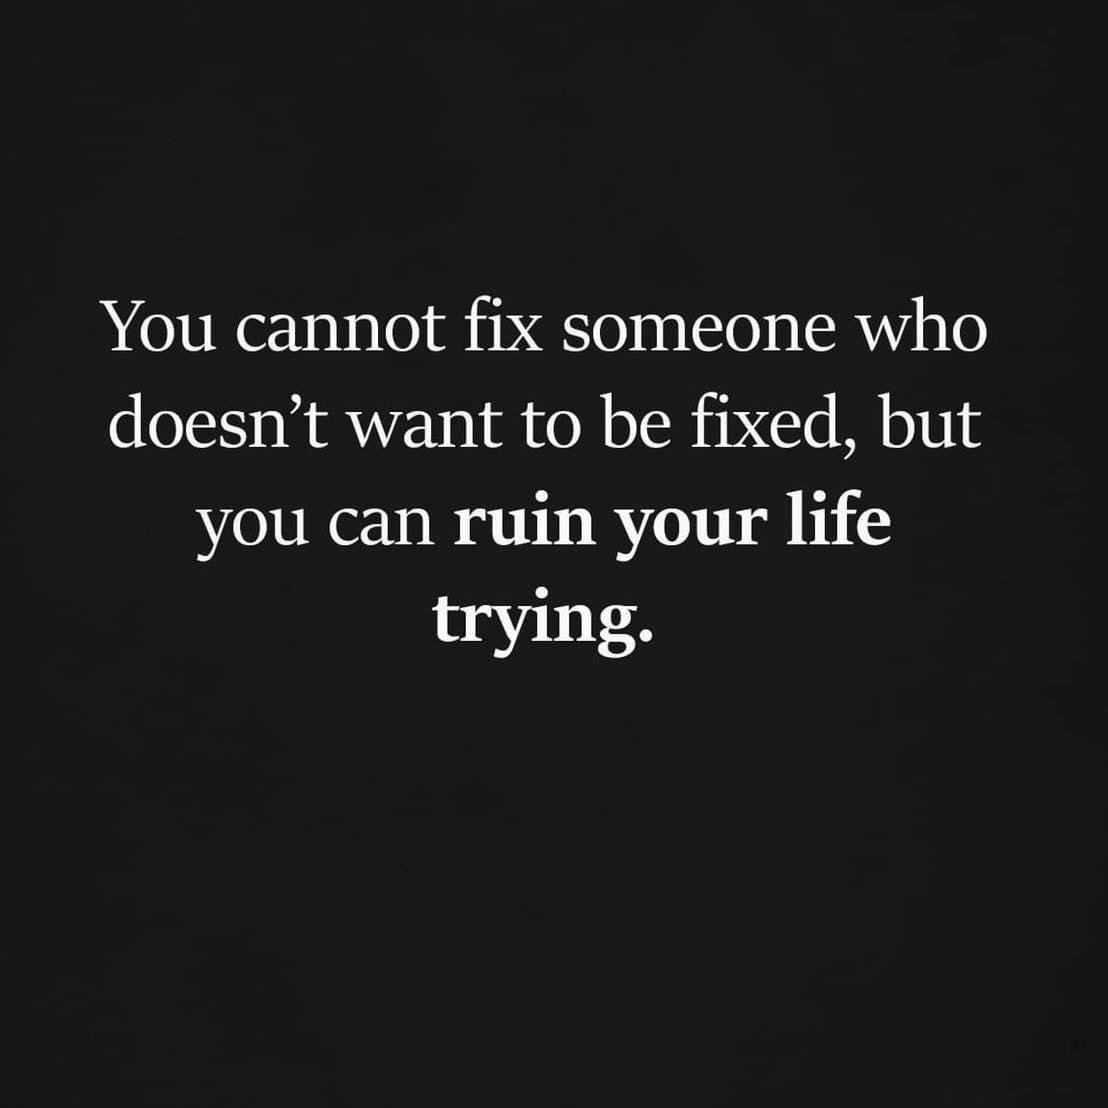 You cannot fix someone who doesn't want to be fixed, but you can ruin your life trying.